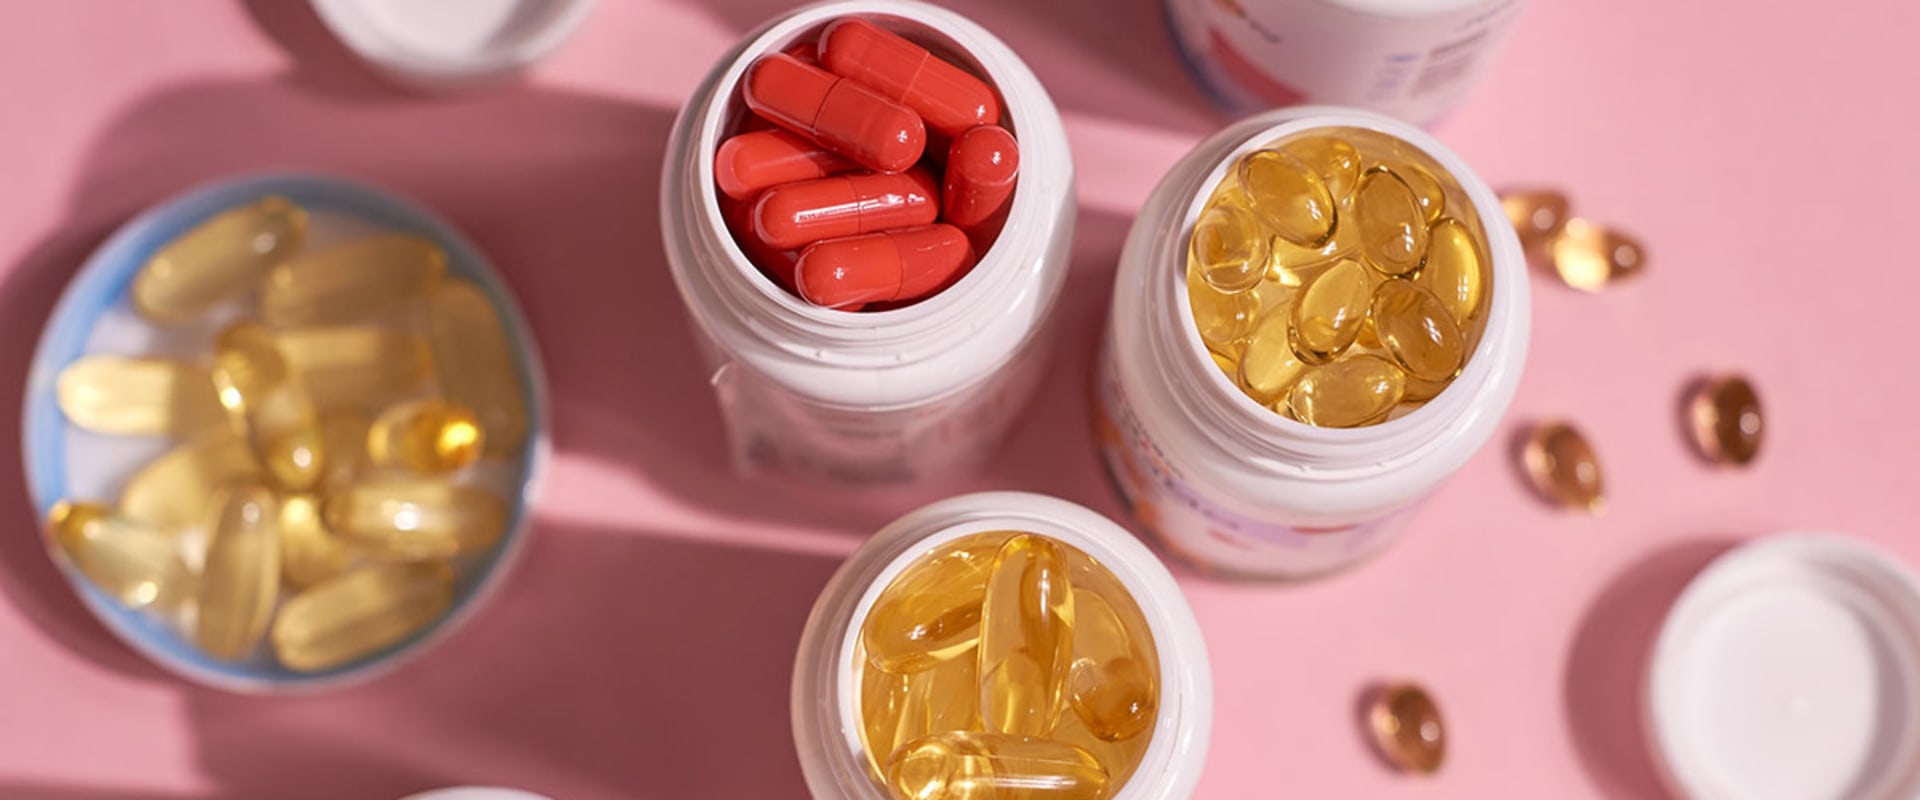 The Ultimate Guide to Anti-Aging Treatments, Supplements, and Foods